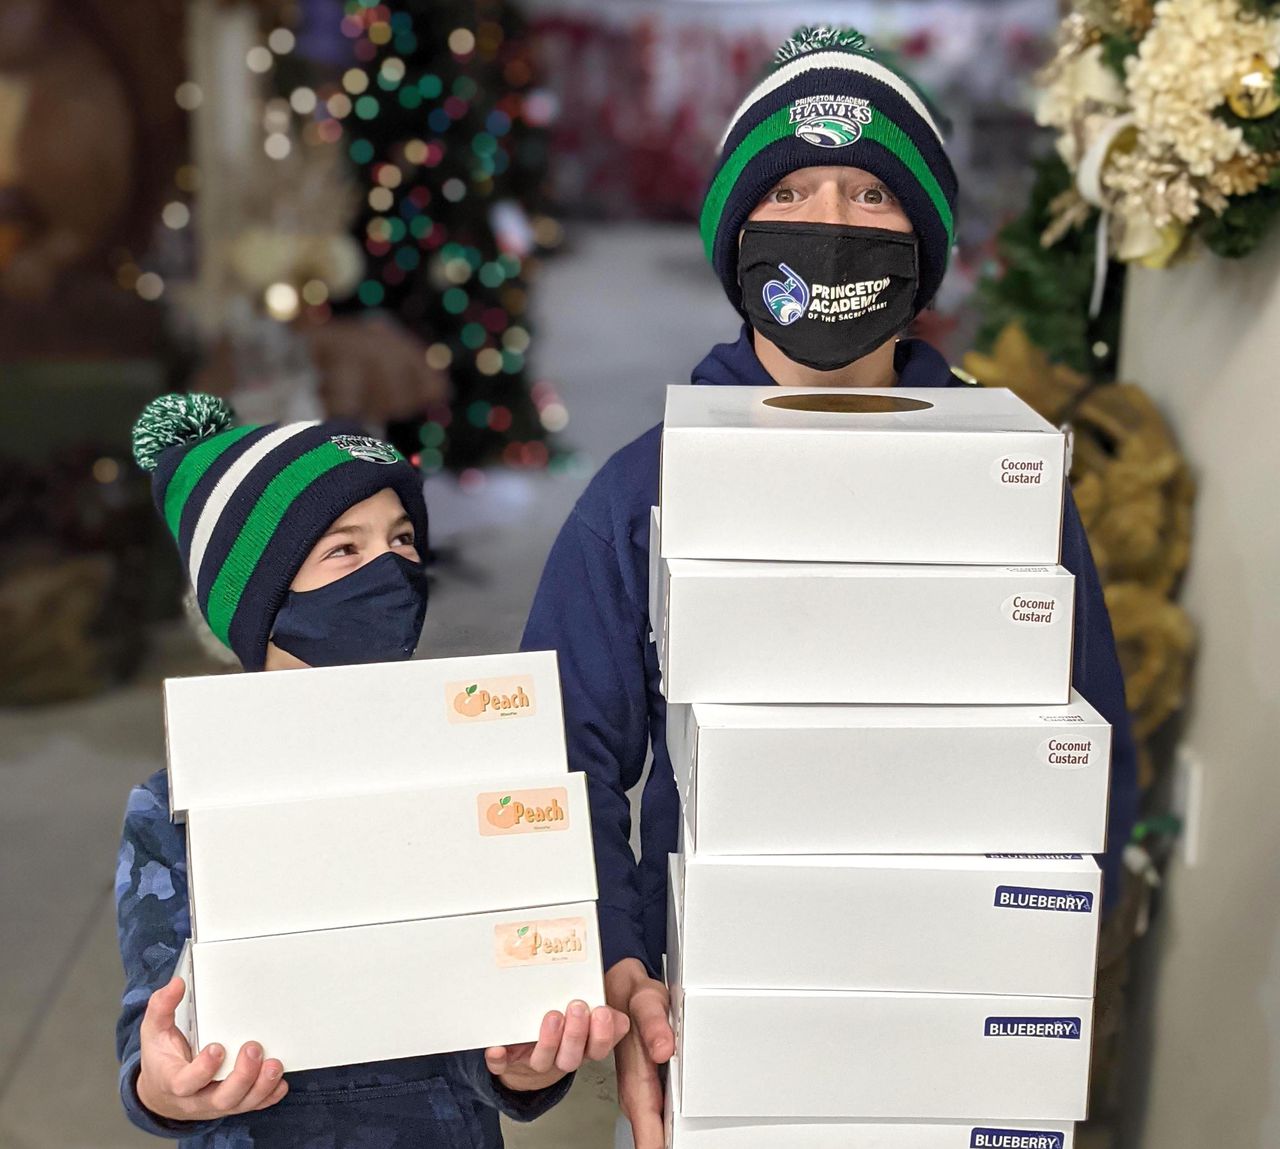 Sandro Cunningham, 11, right, gets help delivering pies from his brother Crescenzo, 7, at the Trenton Area Soup Kitchen on Nov. 25, 2020, the day before Thanksgiving.